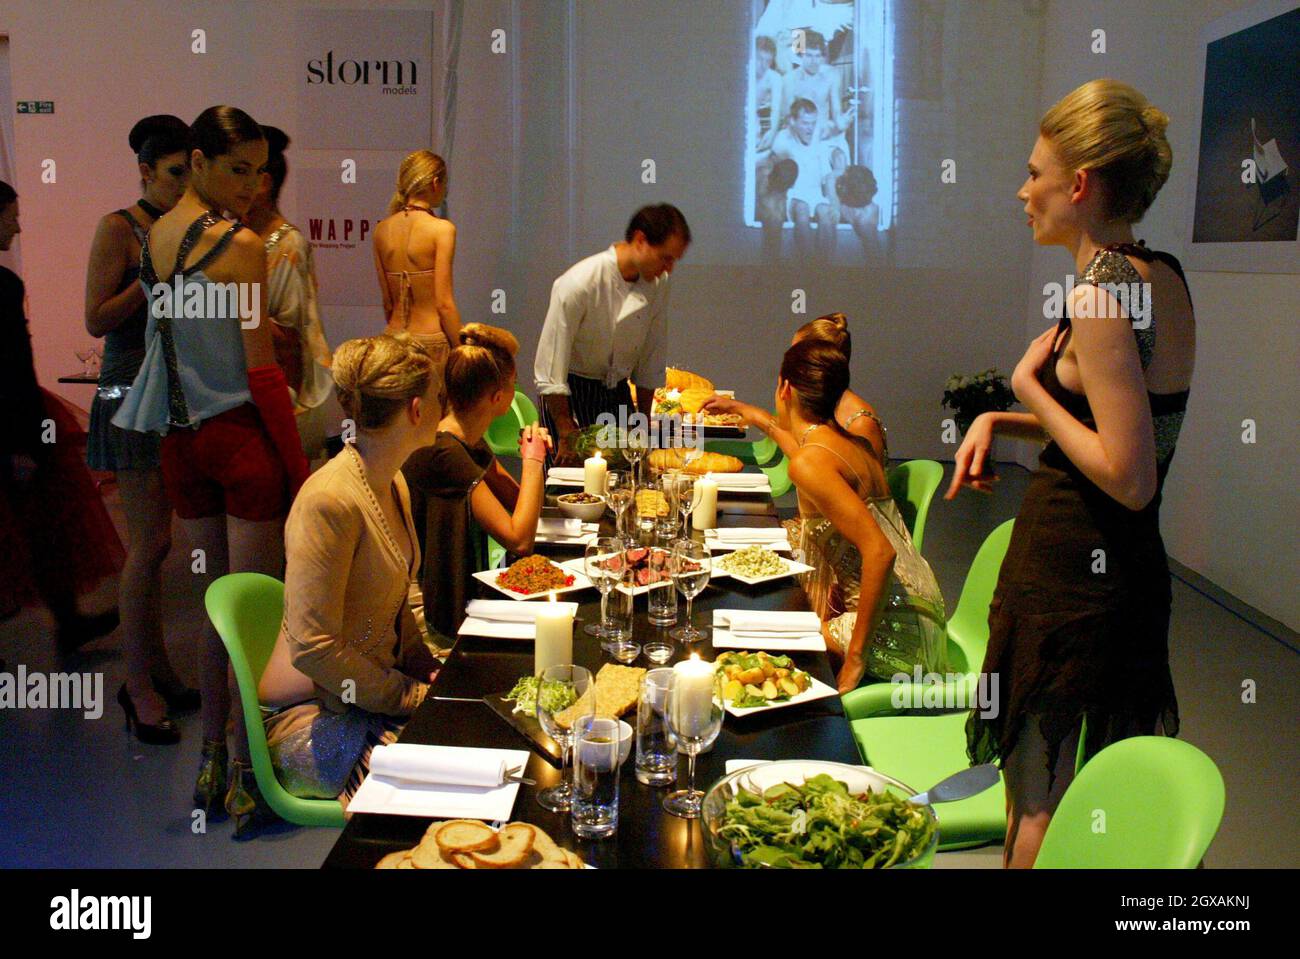 To celebrate their inclusion on the Superbrands Cool BrandLeaders list, The Wapping Project, contemporary arts building and restaurant,  invited eight models from the Storm Models agency, dressed in the current cult fashion brand Sass & Bide, to indulge in a renaissance feast. Stock Photo